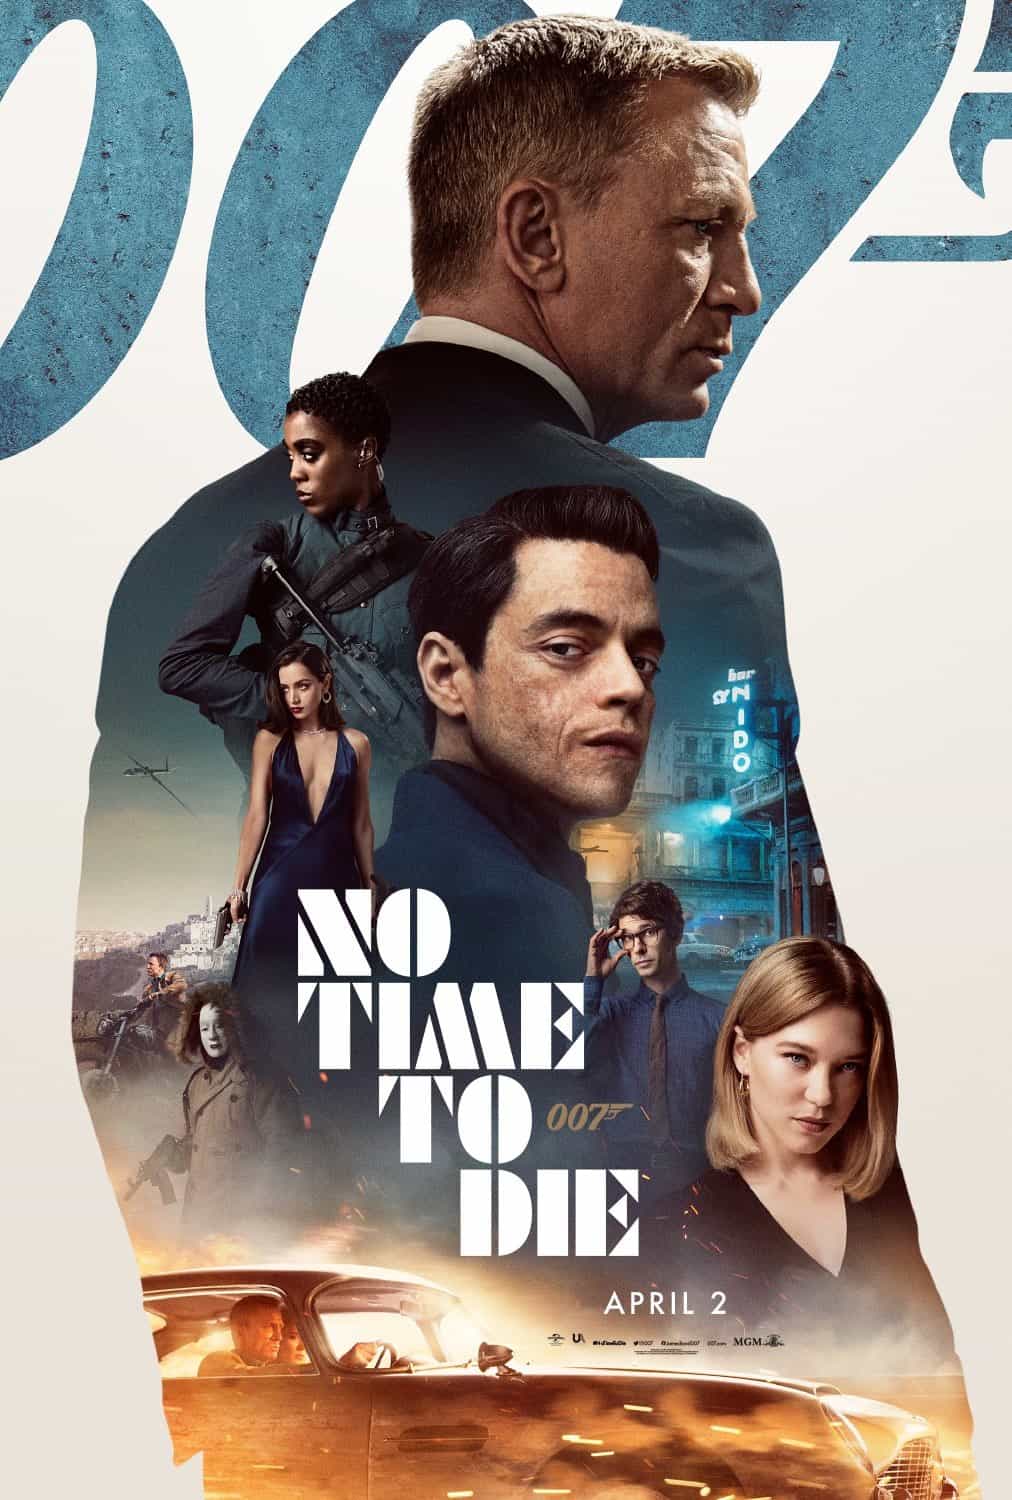 UK Box Office Weekend Report 29th - 31st October 2021:  No Time To Die retakes the top spot while Last Night In Soho is the top new movie